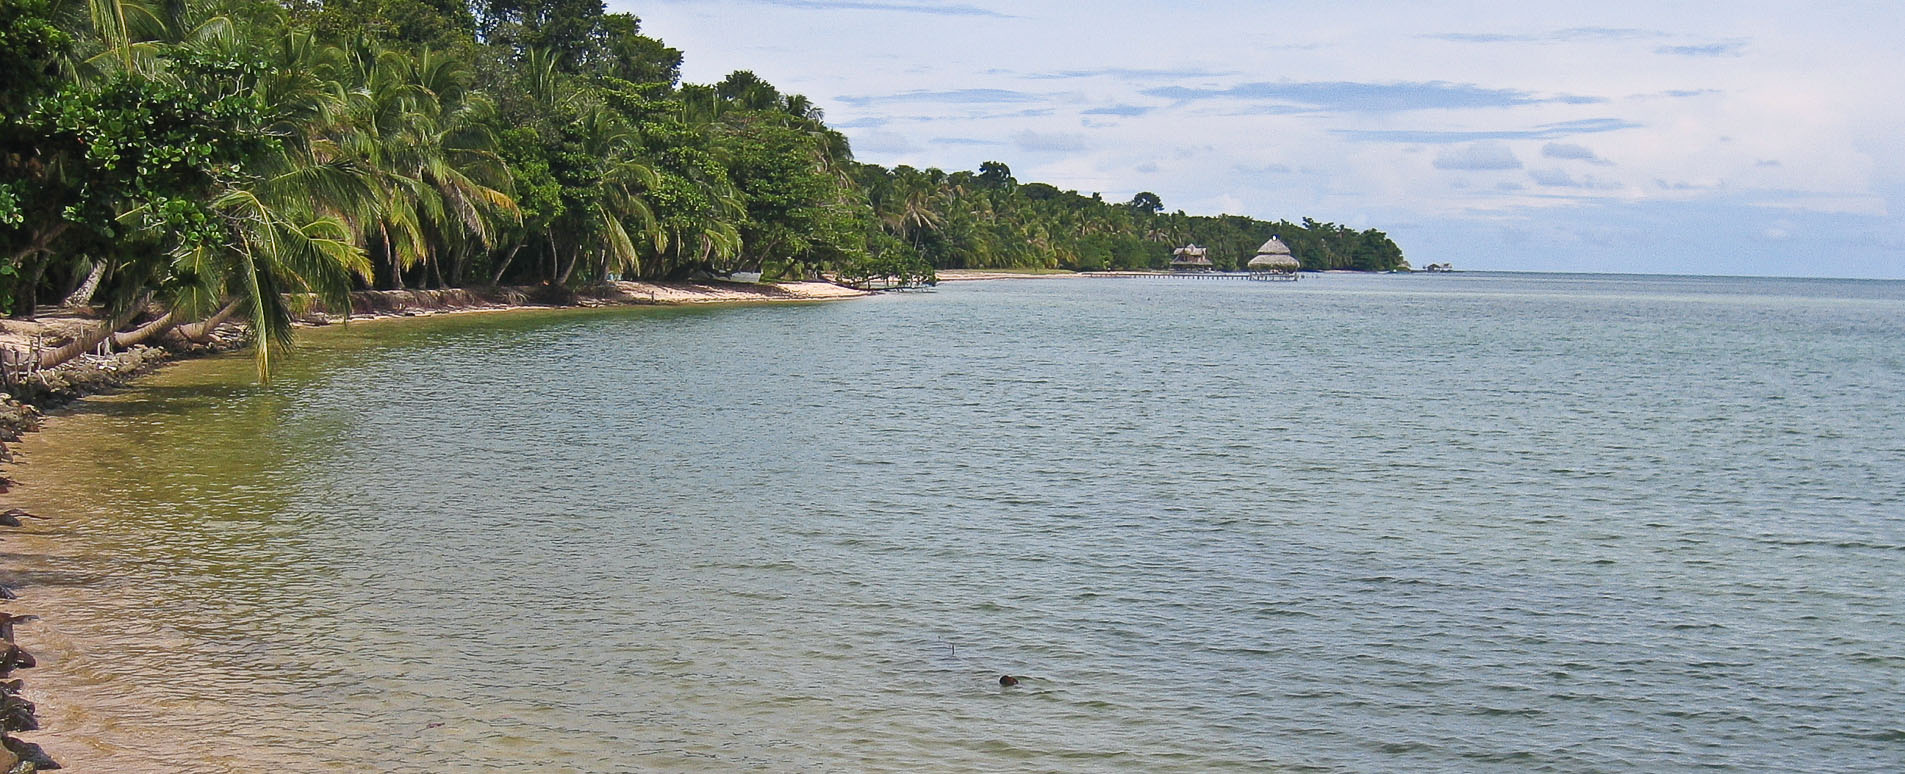 Bocas del Toro|Guide to Panama's Islands and beaches|Geodyssey